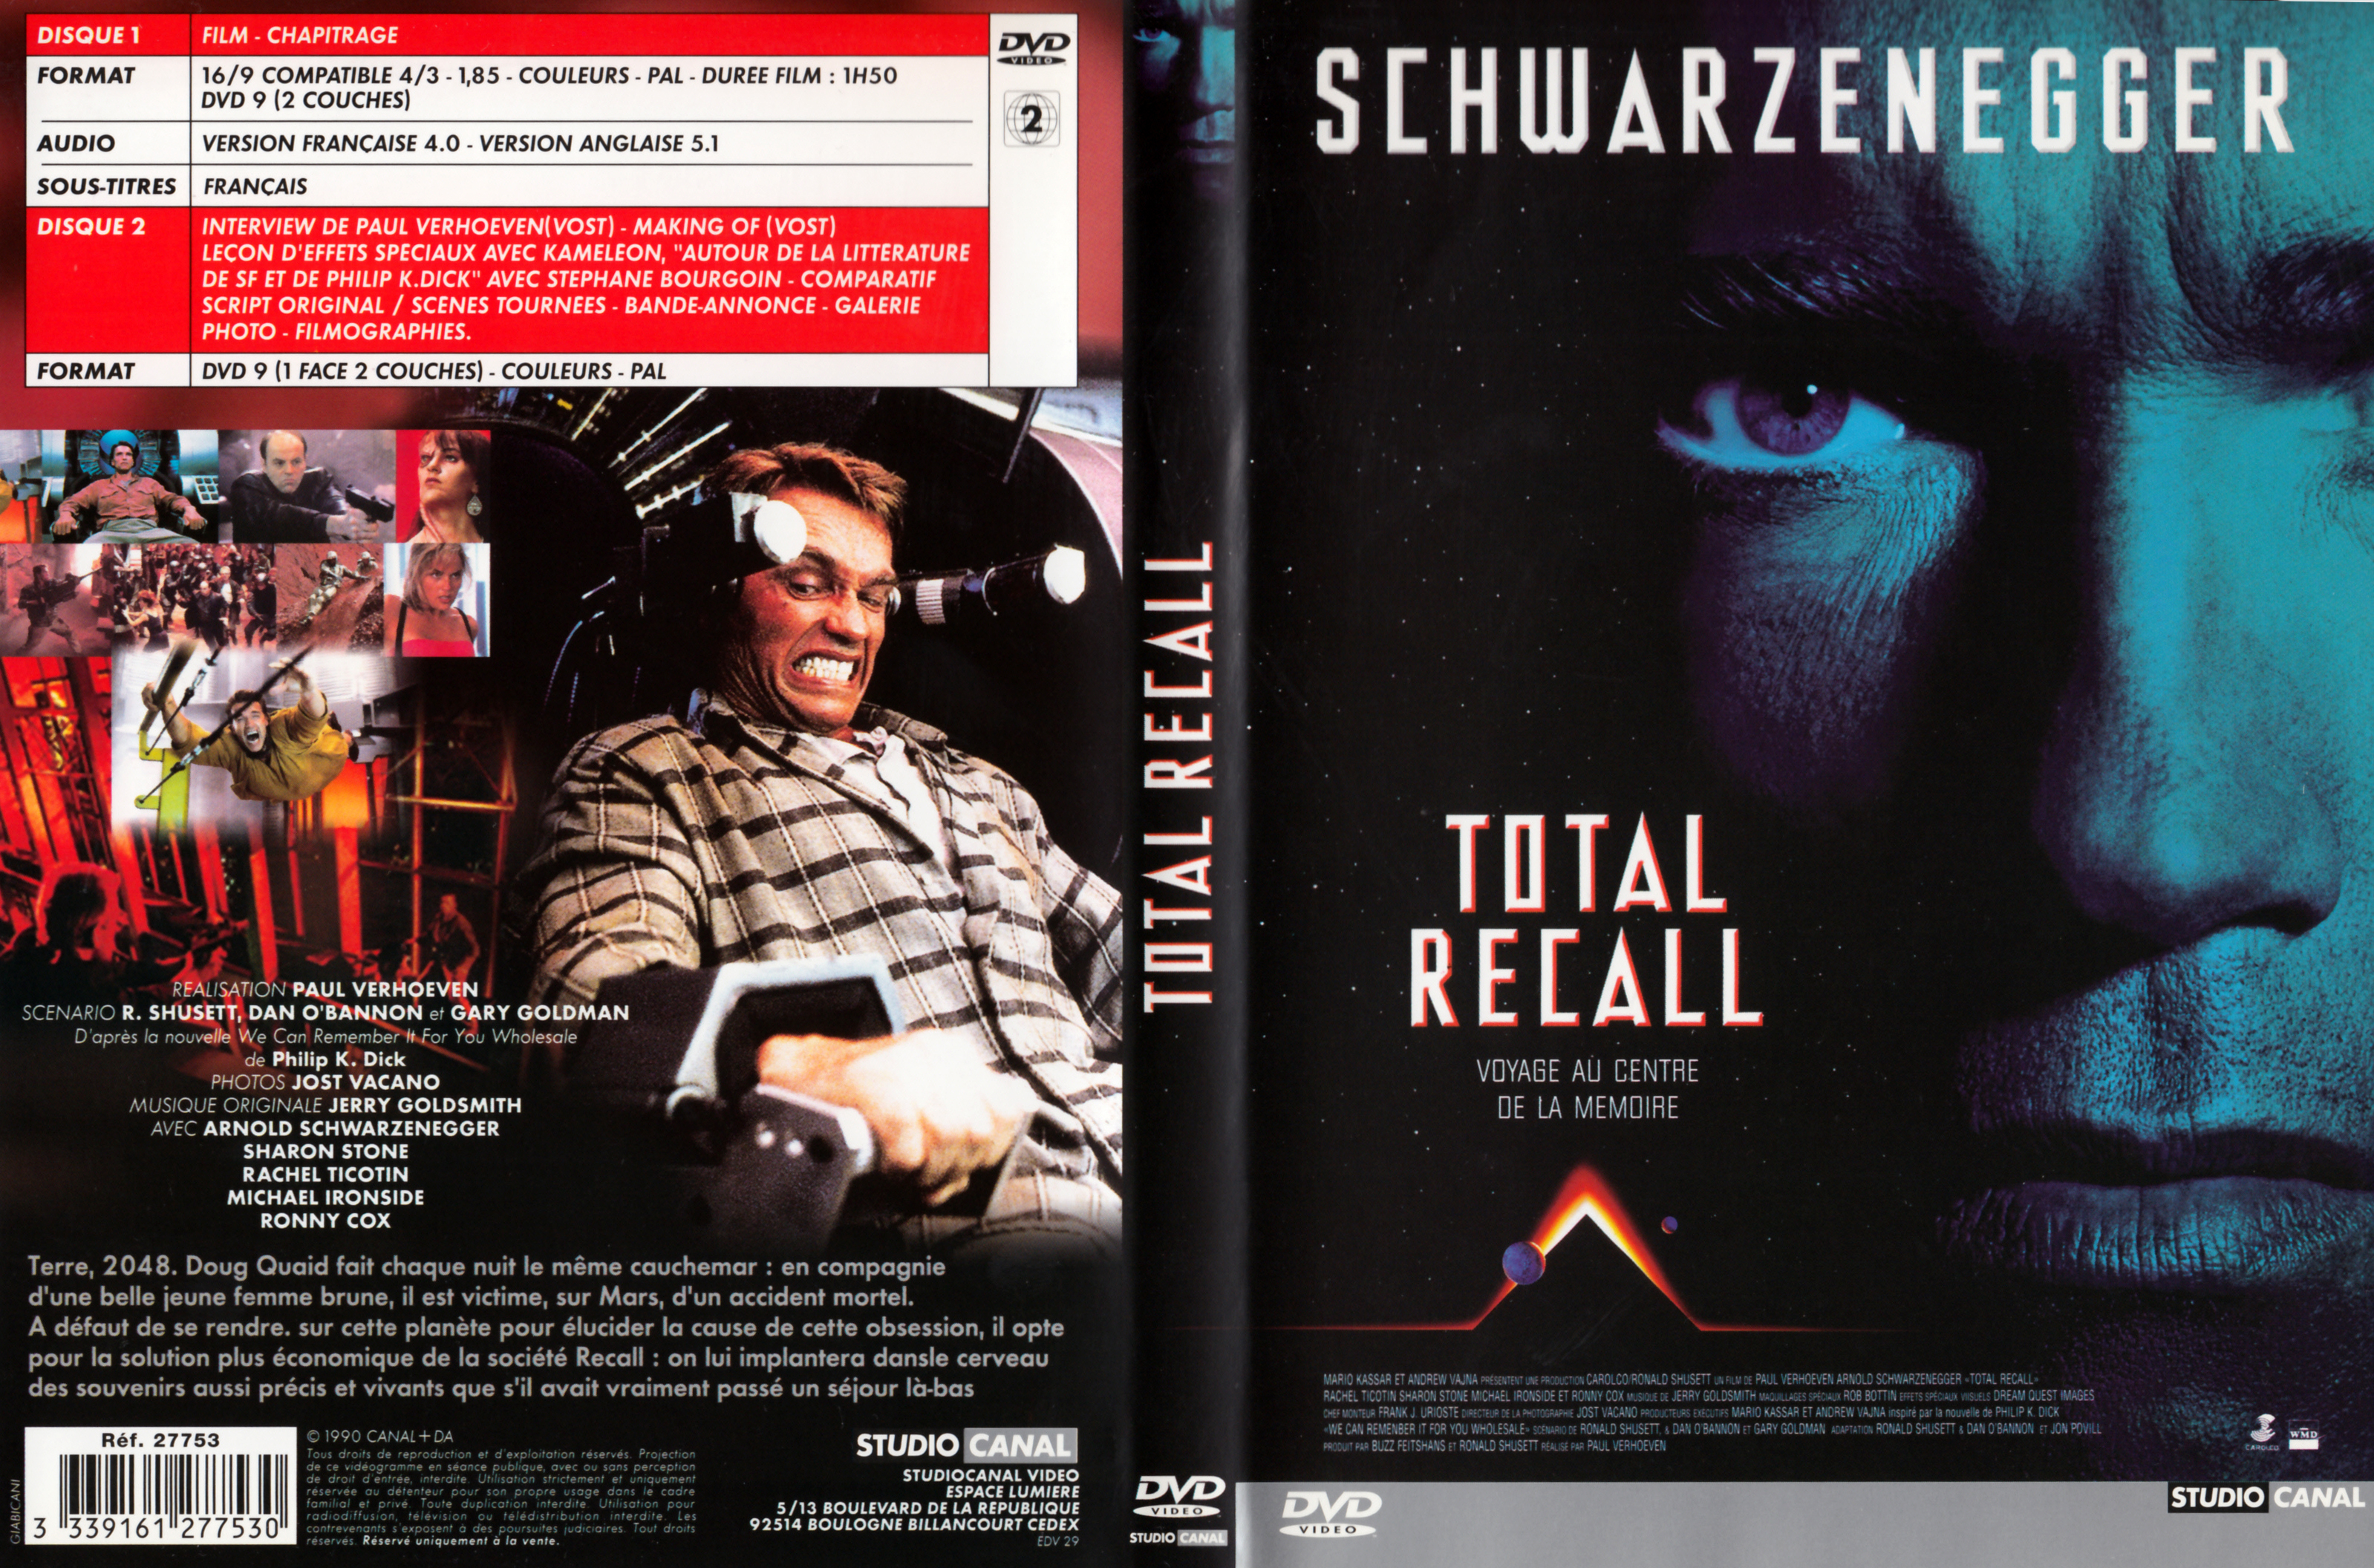 Jaquette DVD Total recall